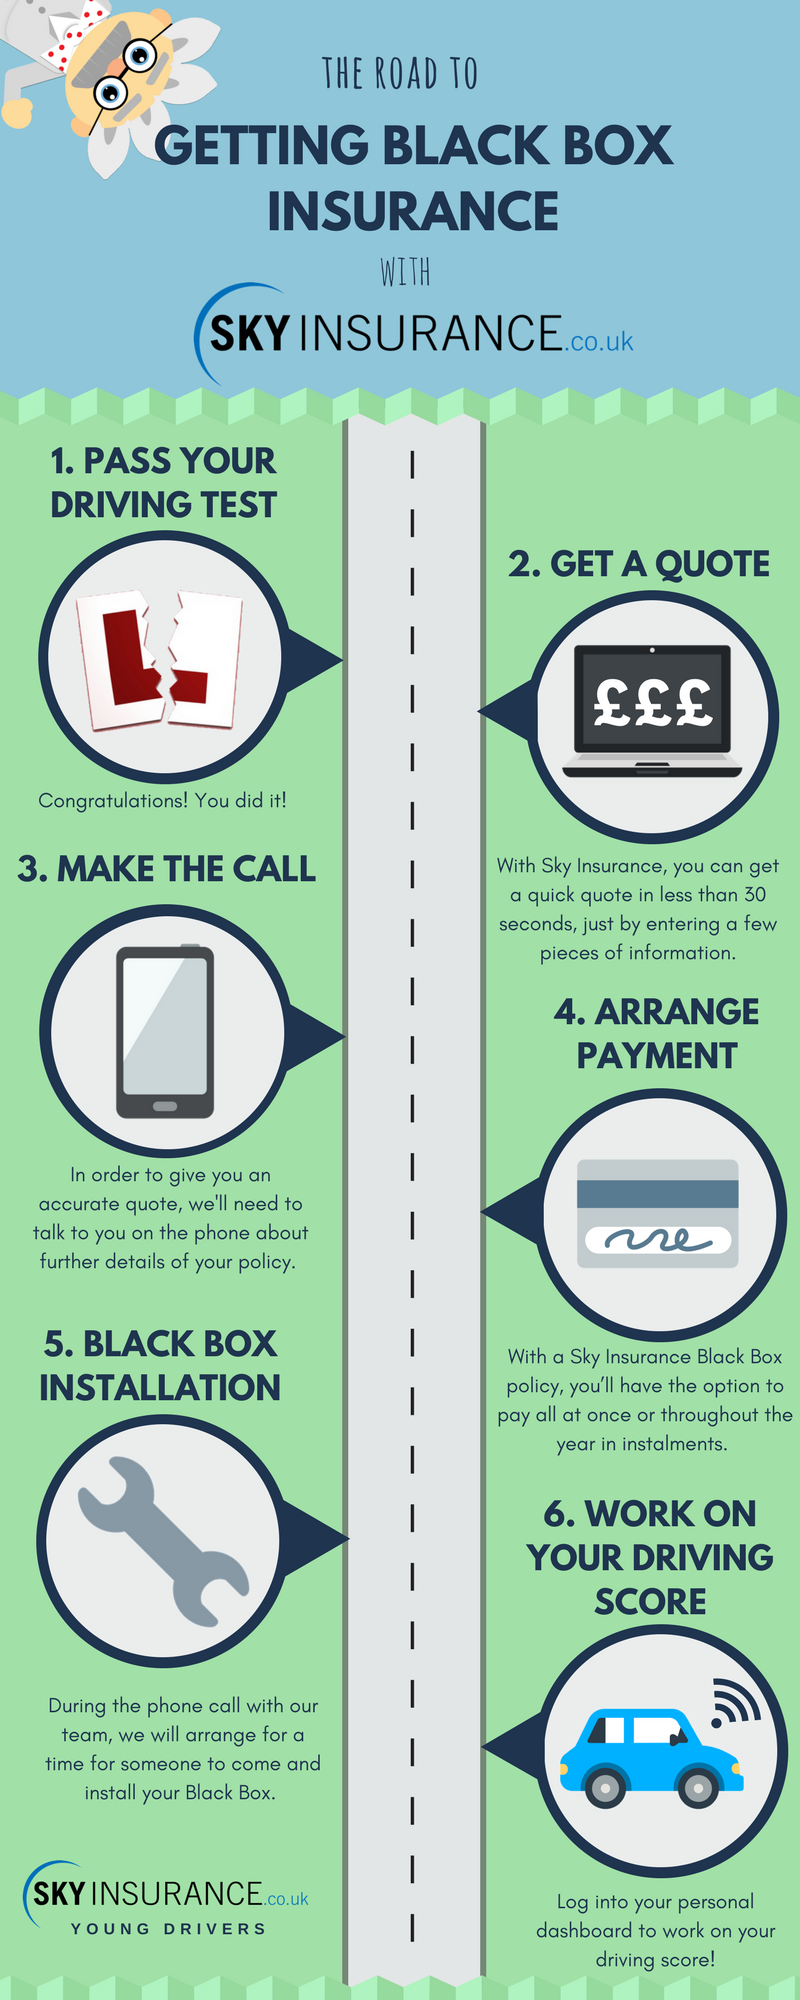 A Guide to Getting a Black Box Policy With Safely Insured